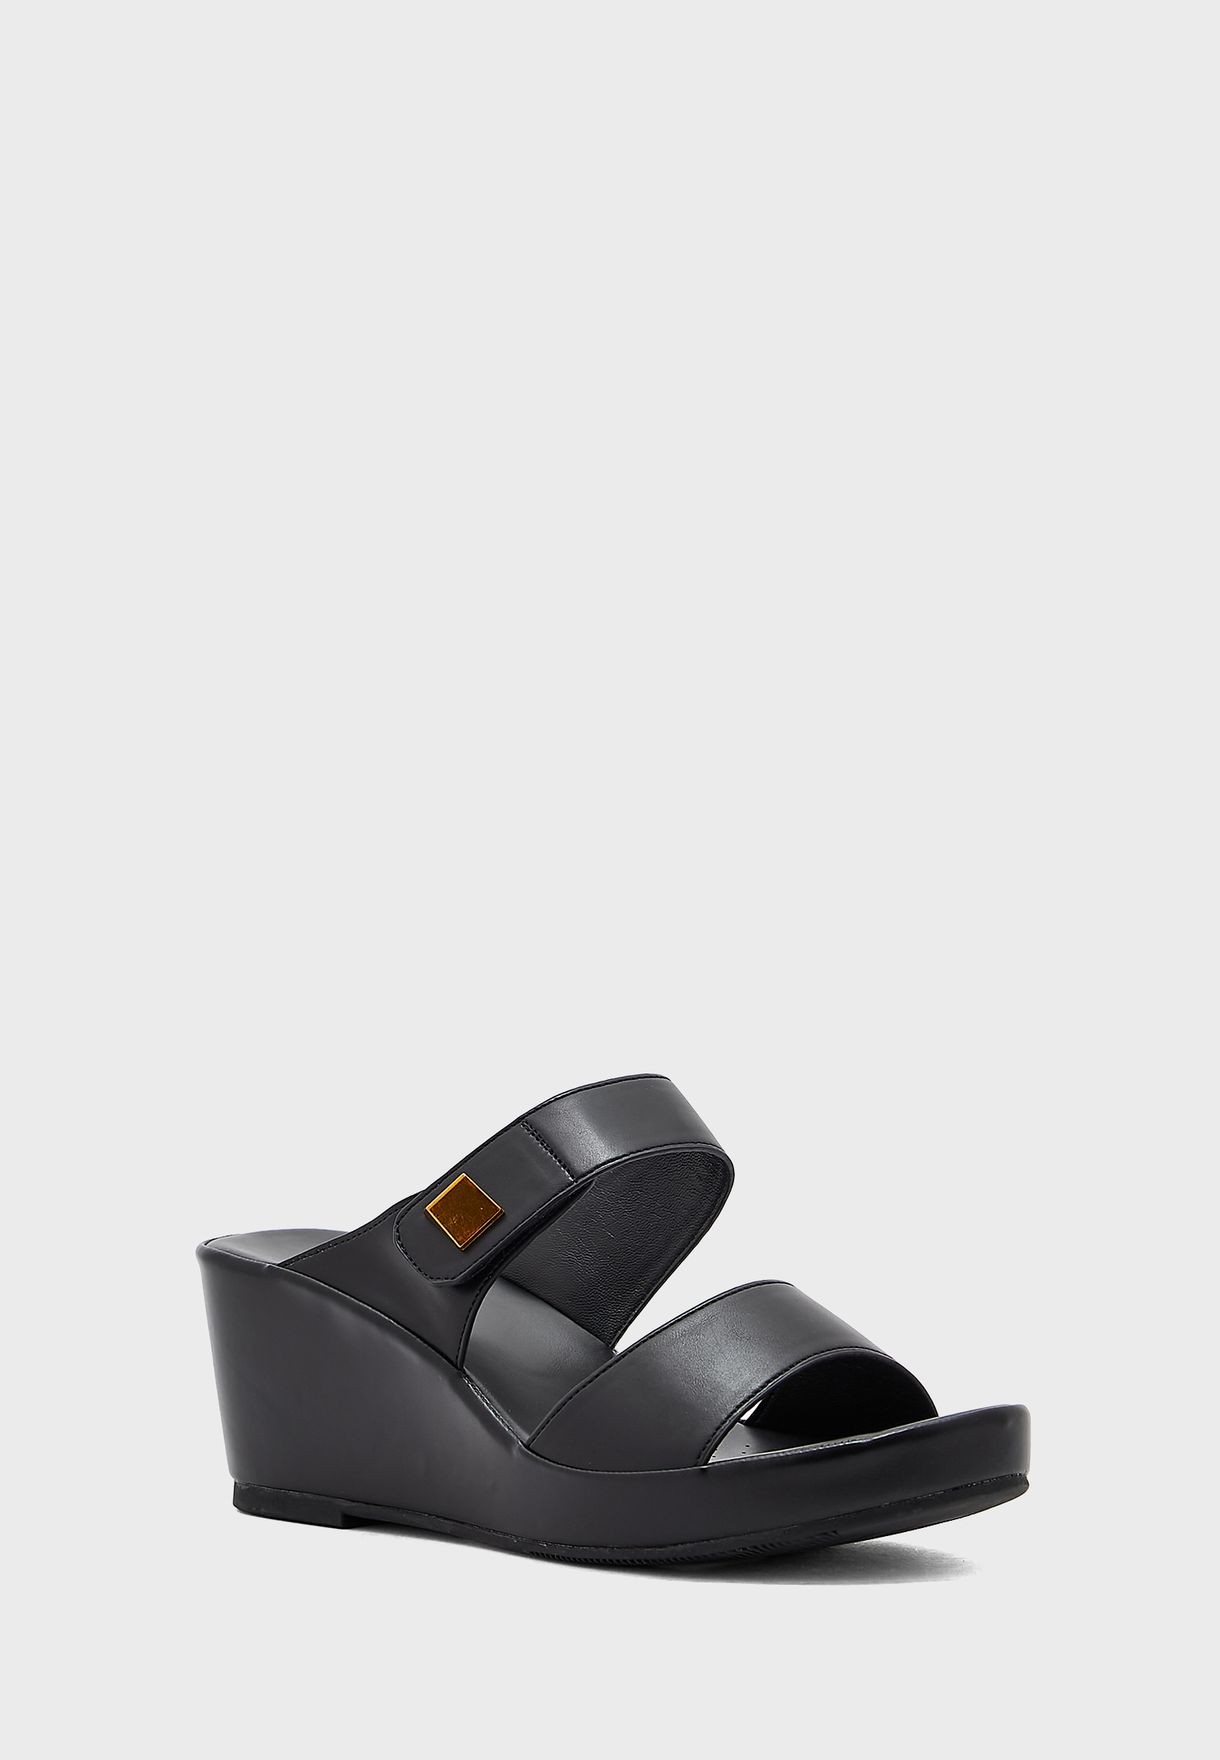 Ankle Strap Wedge Sandals